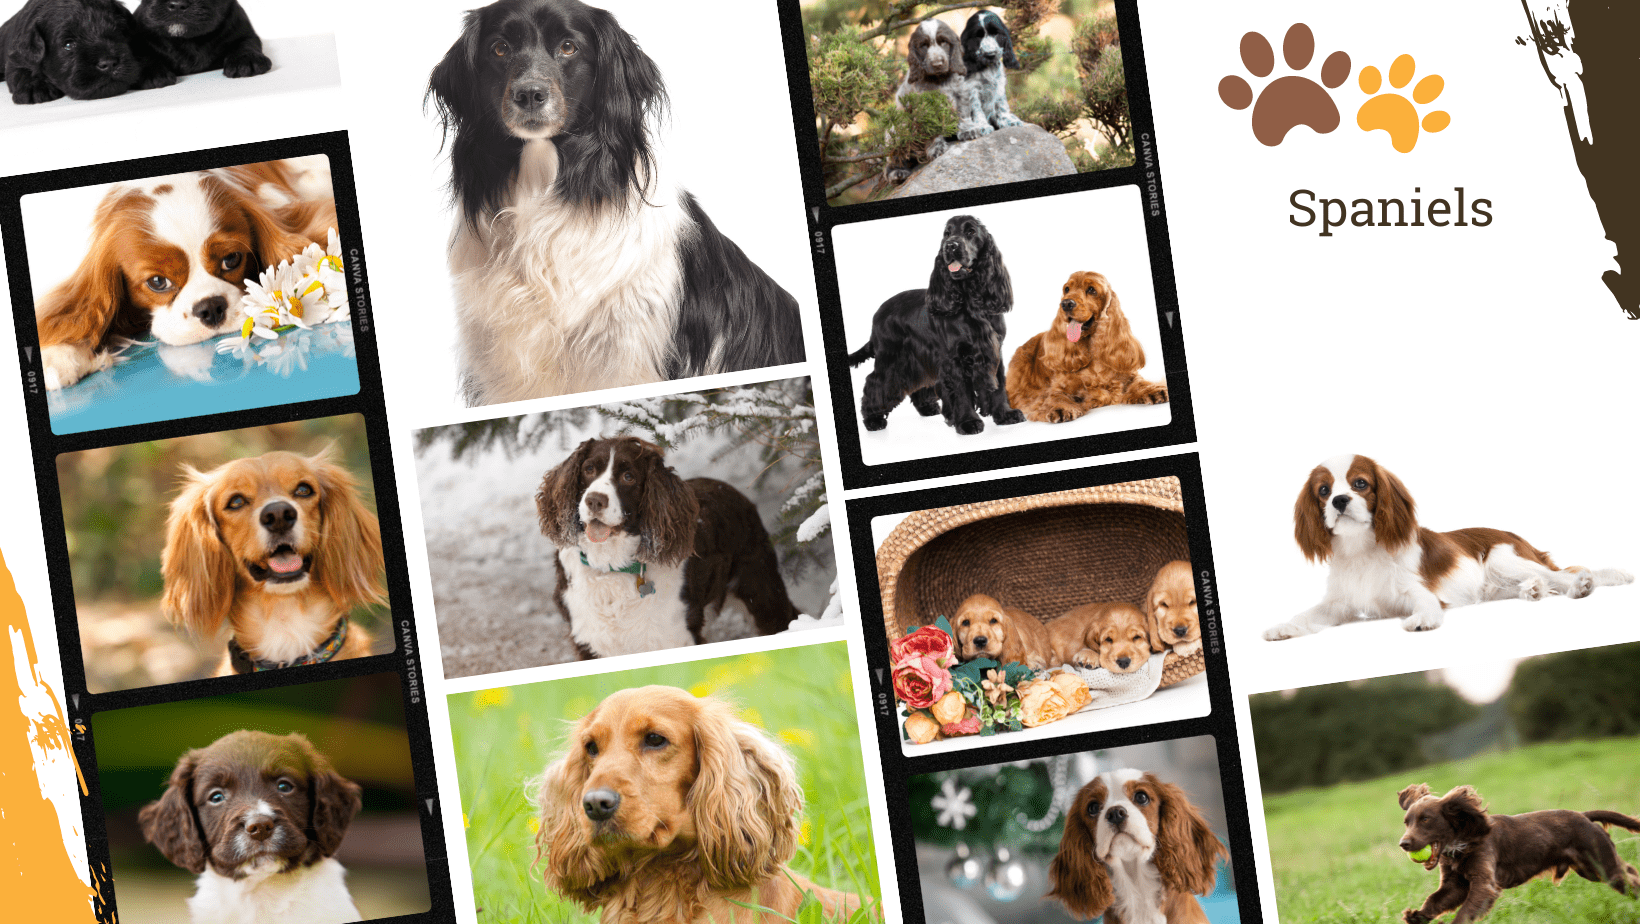 Dog Breed Archive Spaniels Dog Breeds